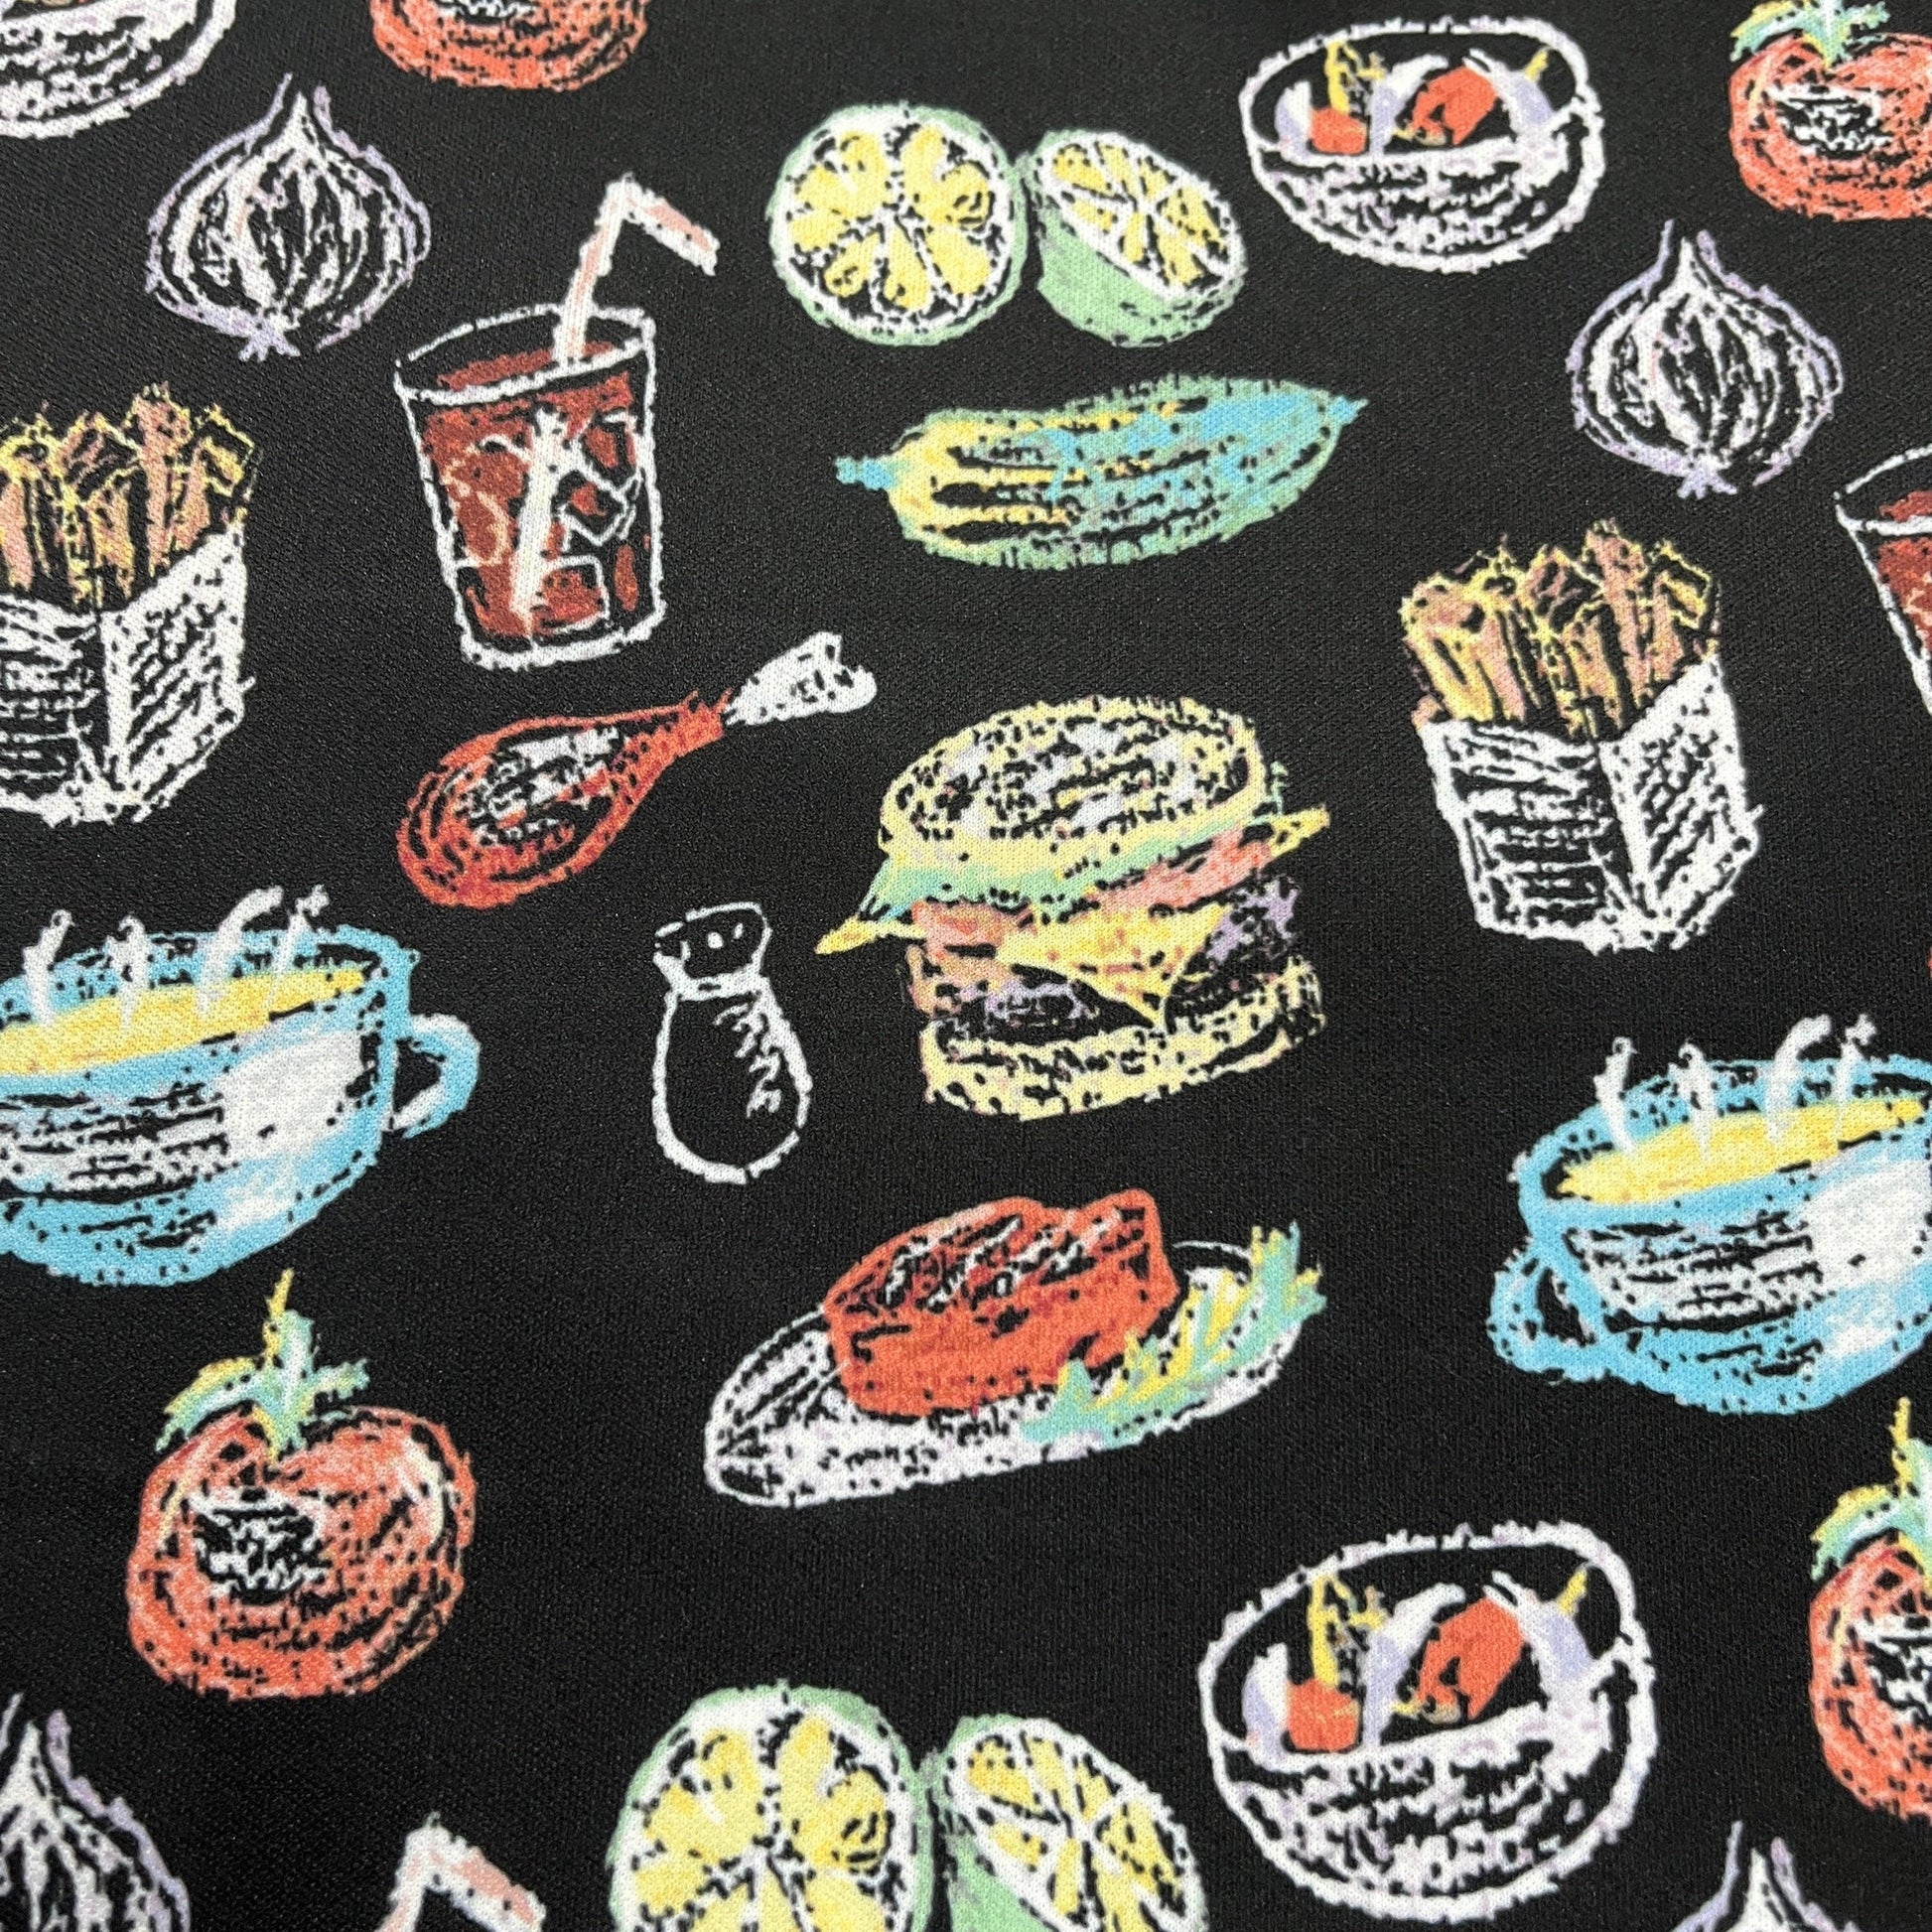 Chalk Art Food on Black 1 mil PUL Fabric - Made in the USA - Nature's Fabrics